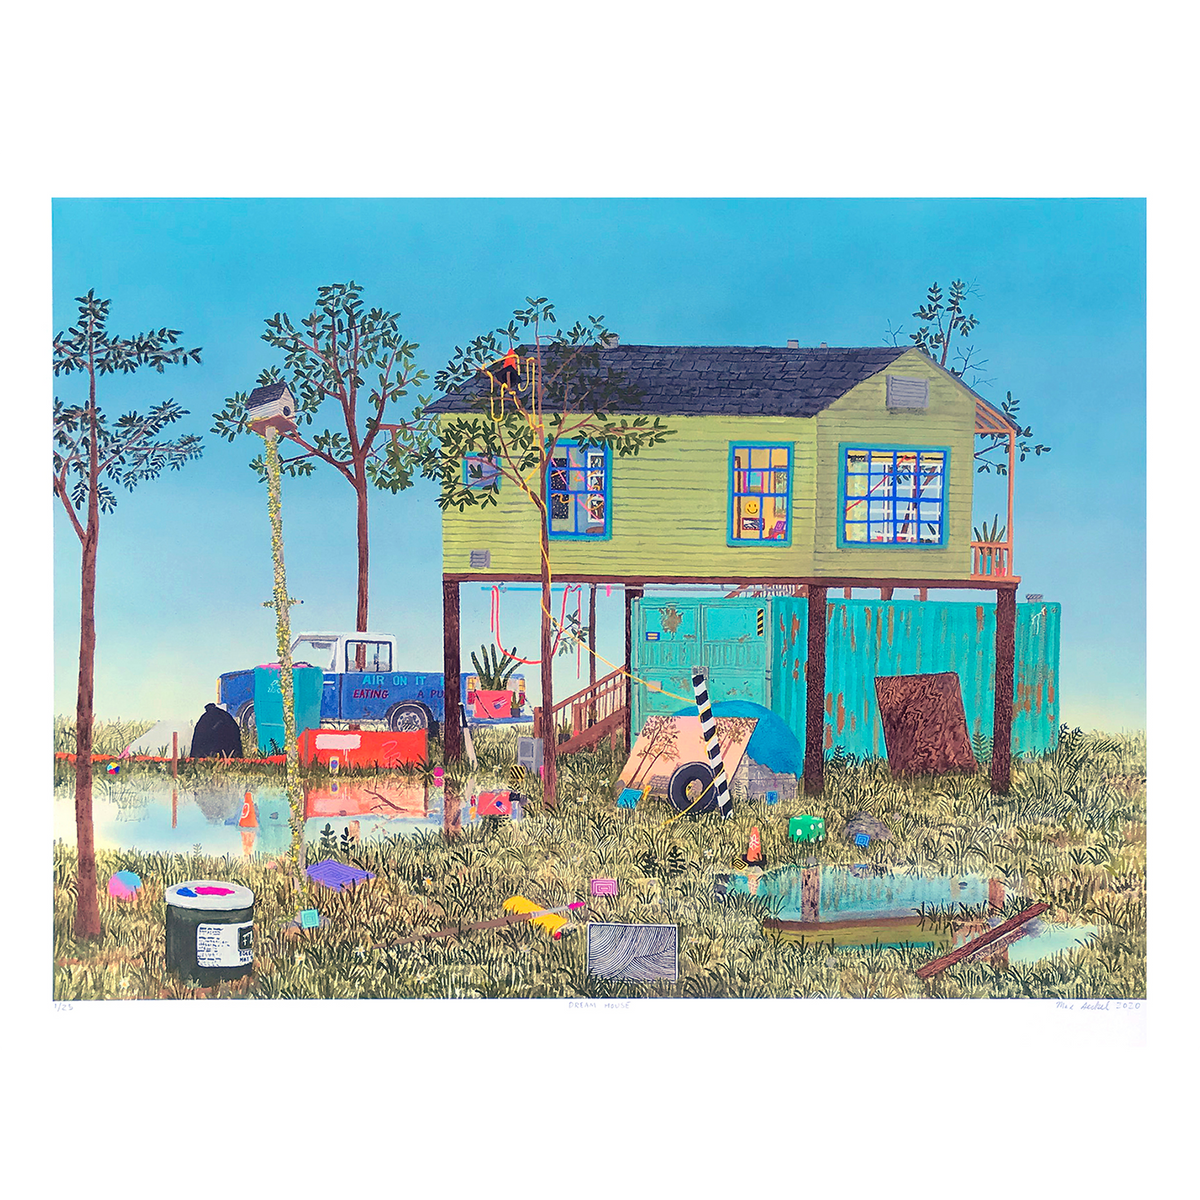 Max Seckel &quot;Dream House&quot; - Archival Print, Limited Edition of 25 - 18 x 24&quot;